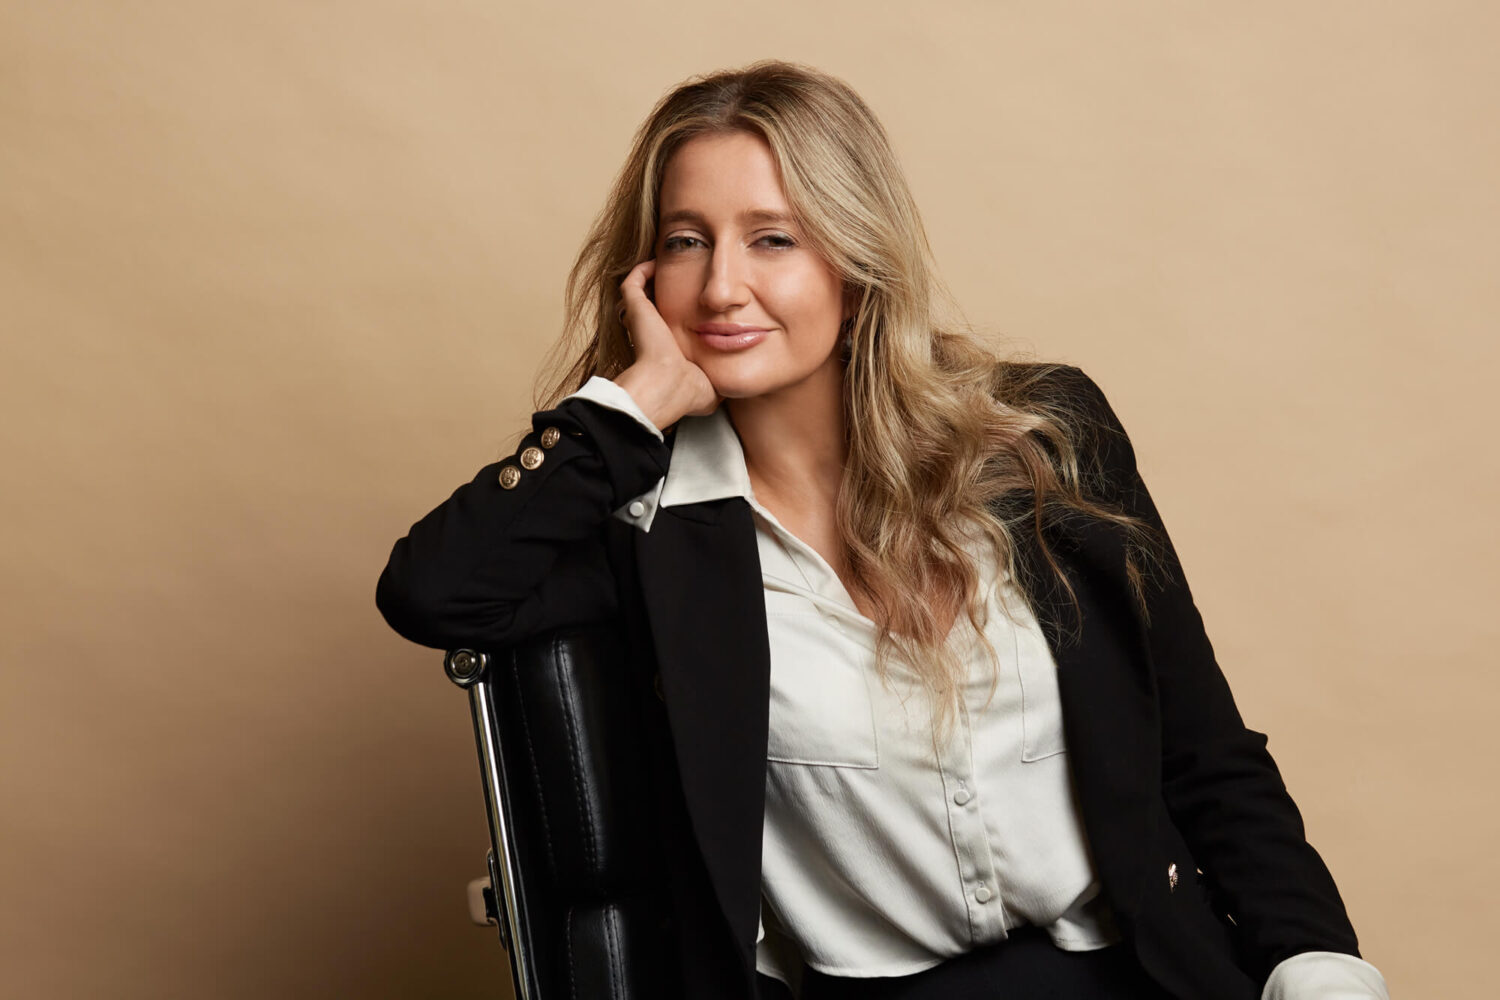 Blonde woman on a black leather chair with her chin resting on the palm of her hand.
She is wearing a white shirt and black jacket.  She is in a studio against a beige coloured background.